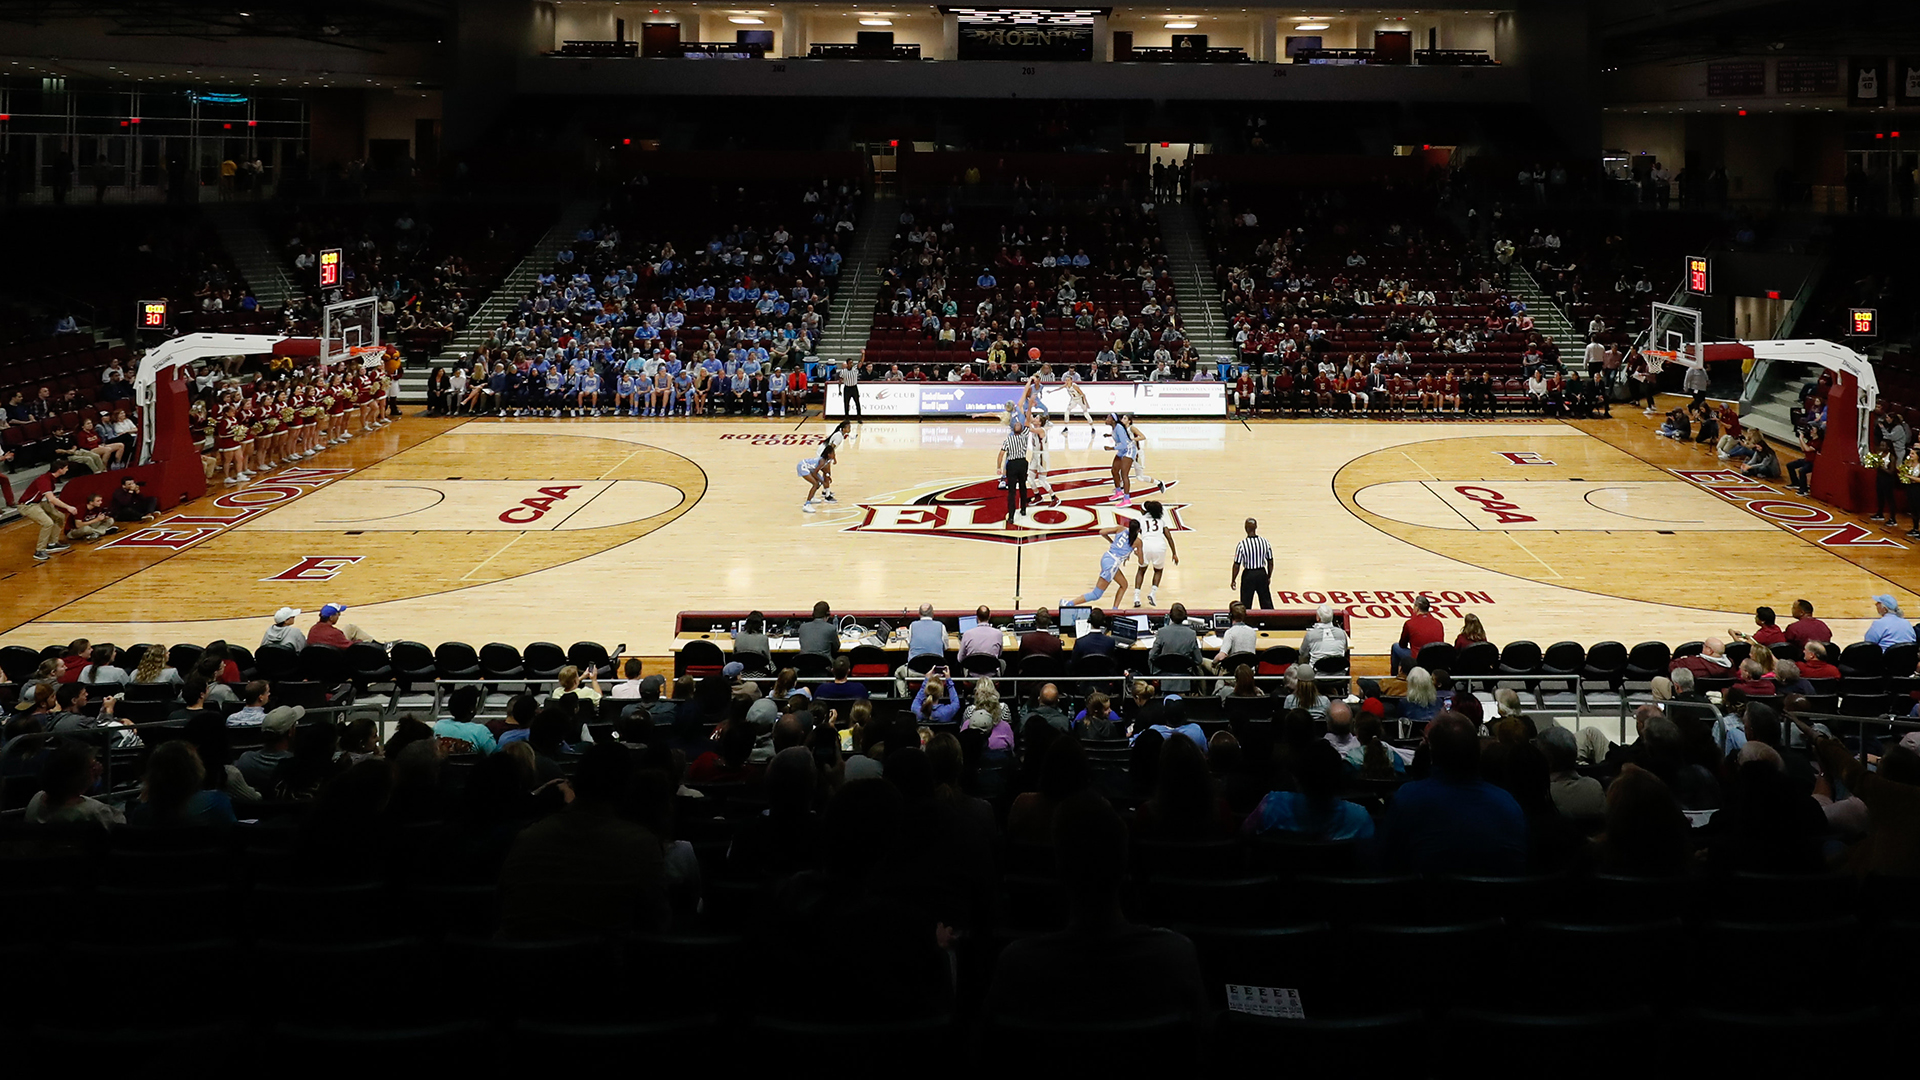 Elon Takes On Unc In Non-conference Women S Basketball - Basketball Court - HD Wallpaper 